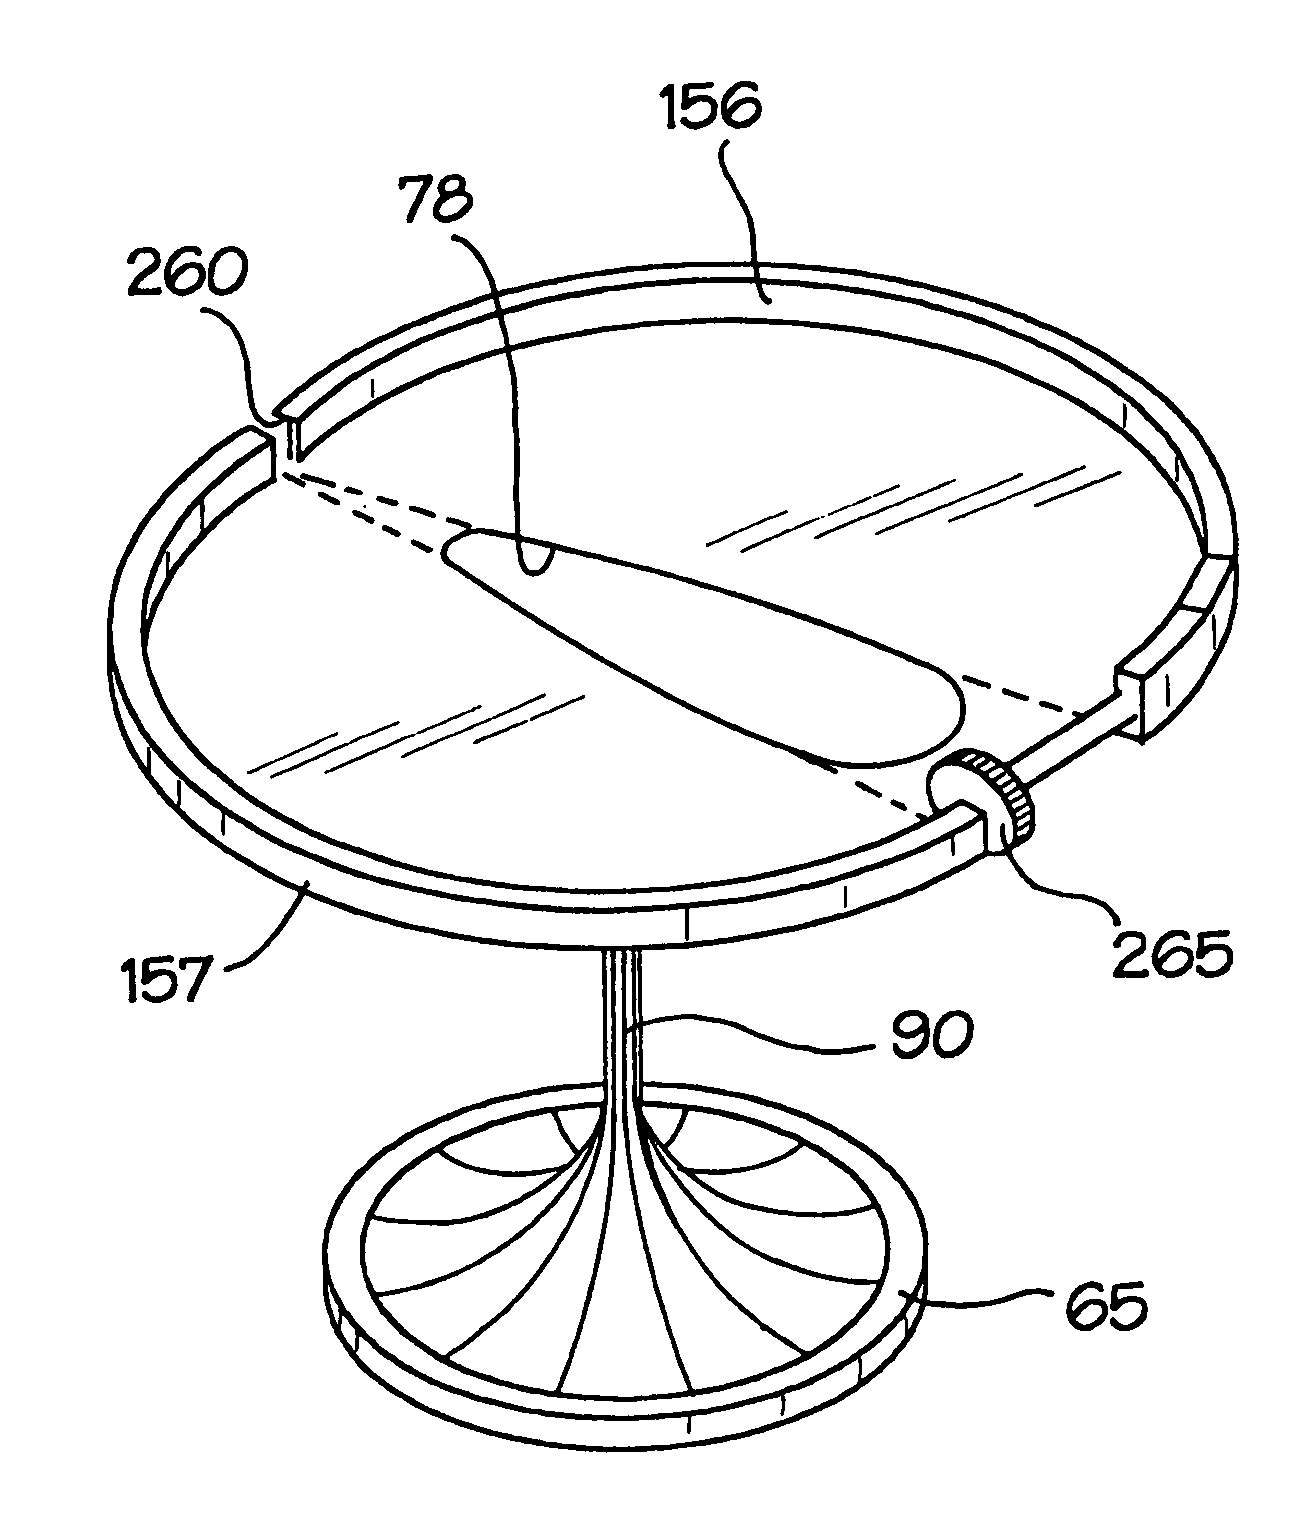 Sealed surgical access device